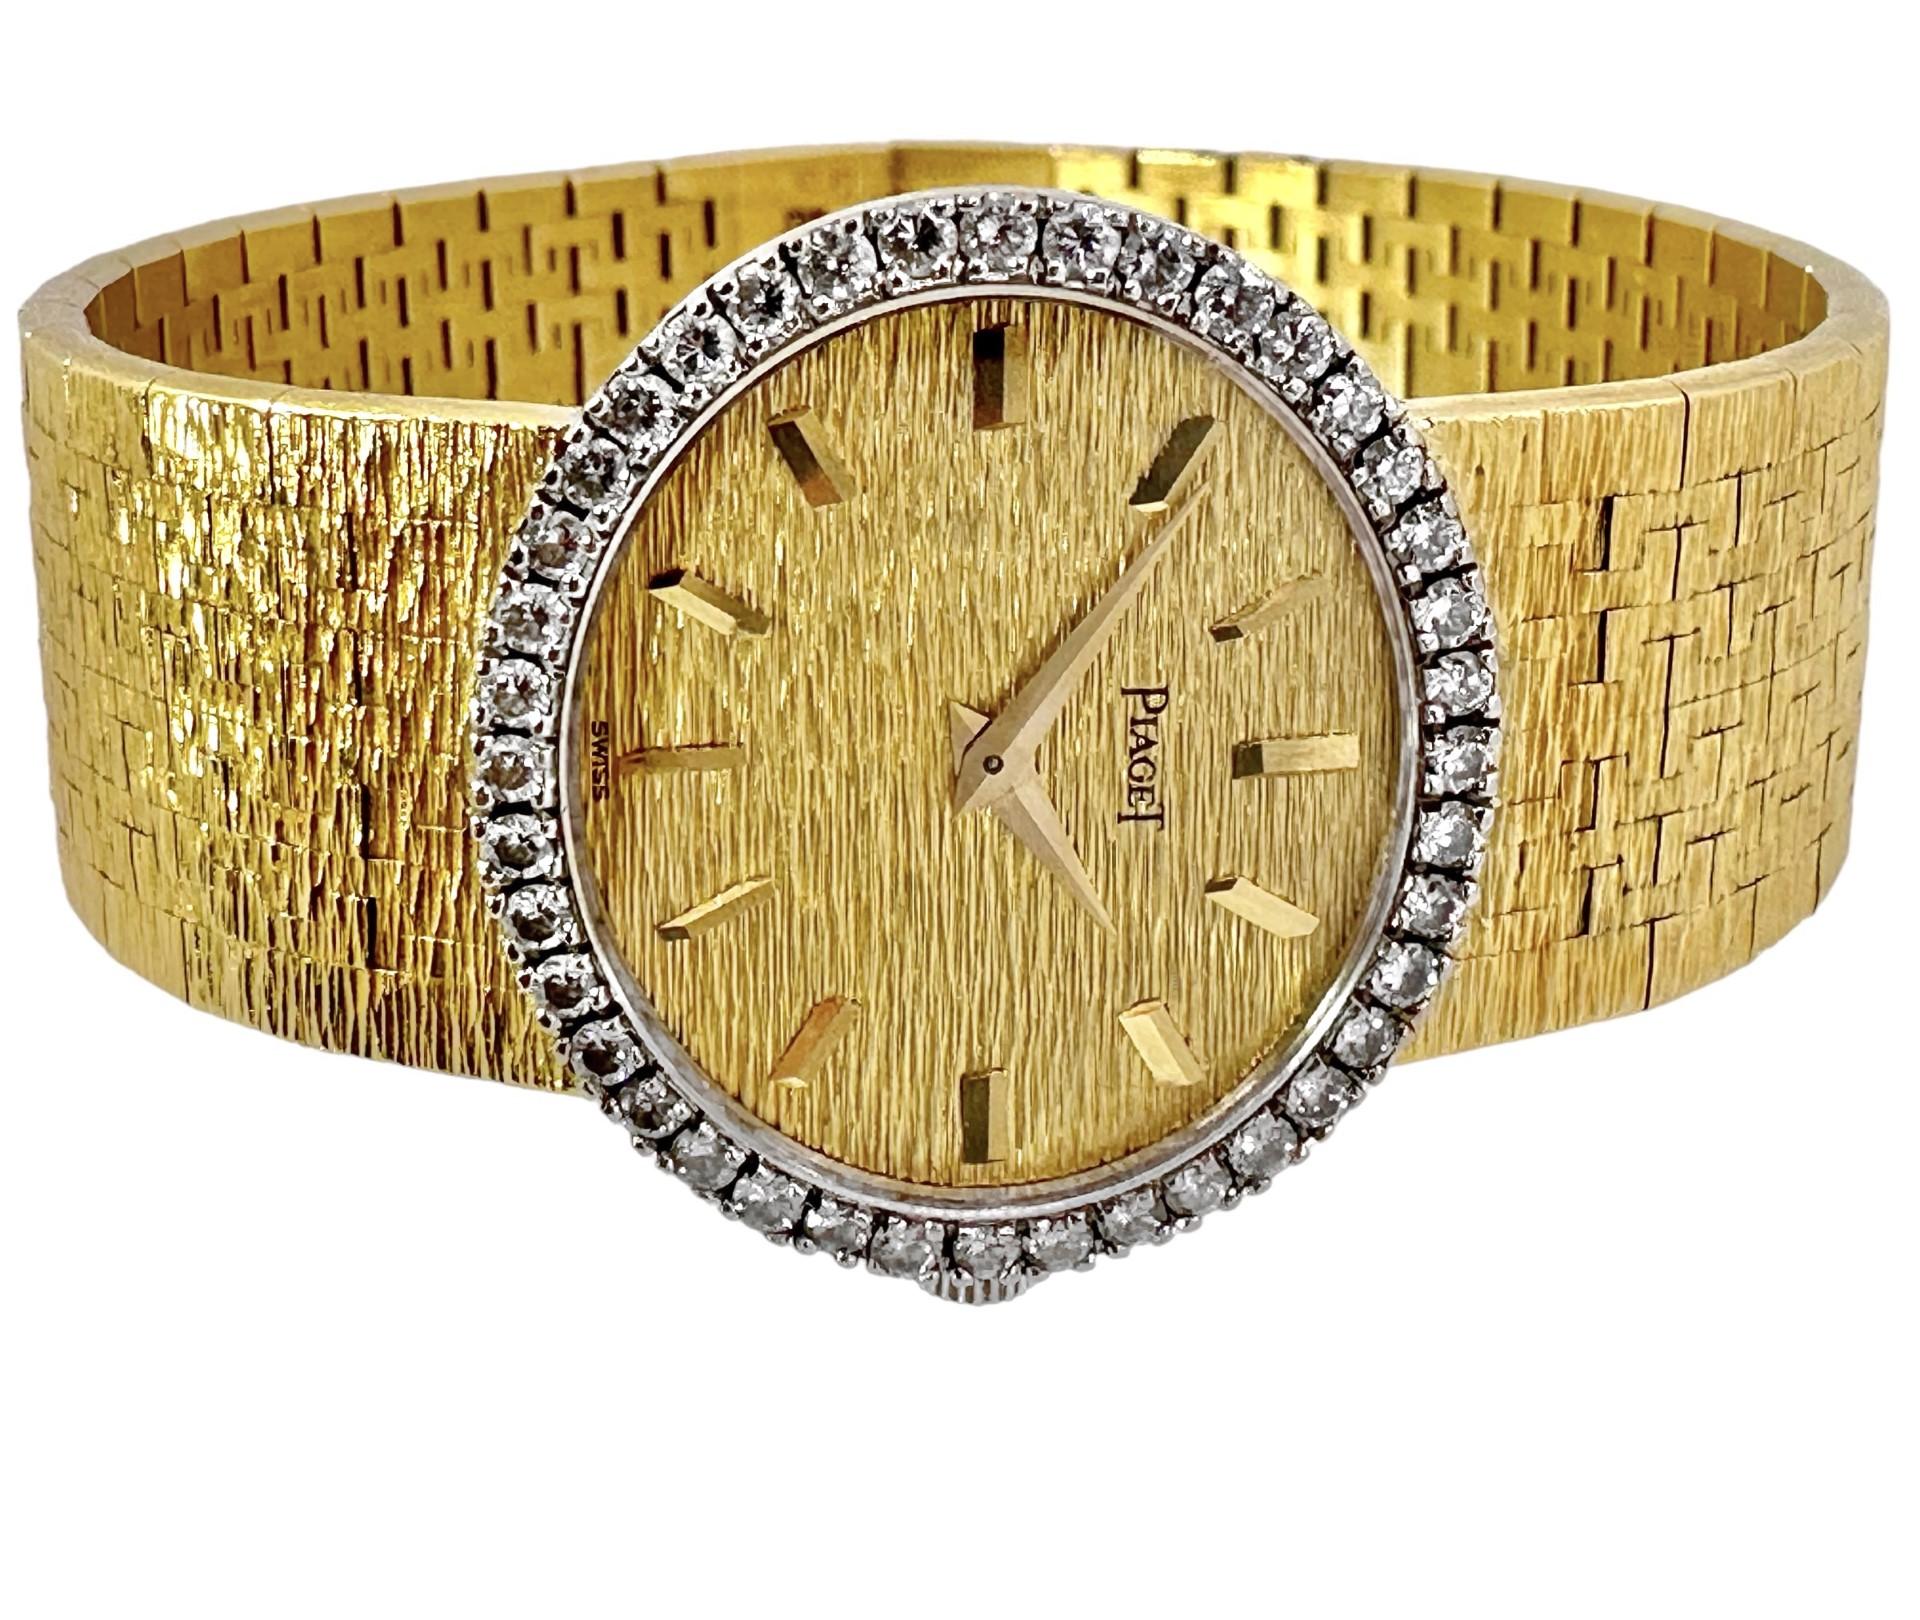 This sophisticated, vintage, ladies 18k yellow gold horizontal oval wristwatch is finished over its entire surface in deep bark finish texture. Even the dial is fashioned in this manner, giving this delightful piece a truly unique and tailored